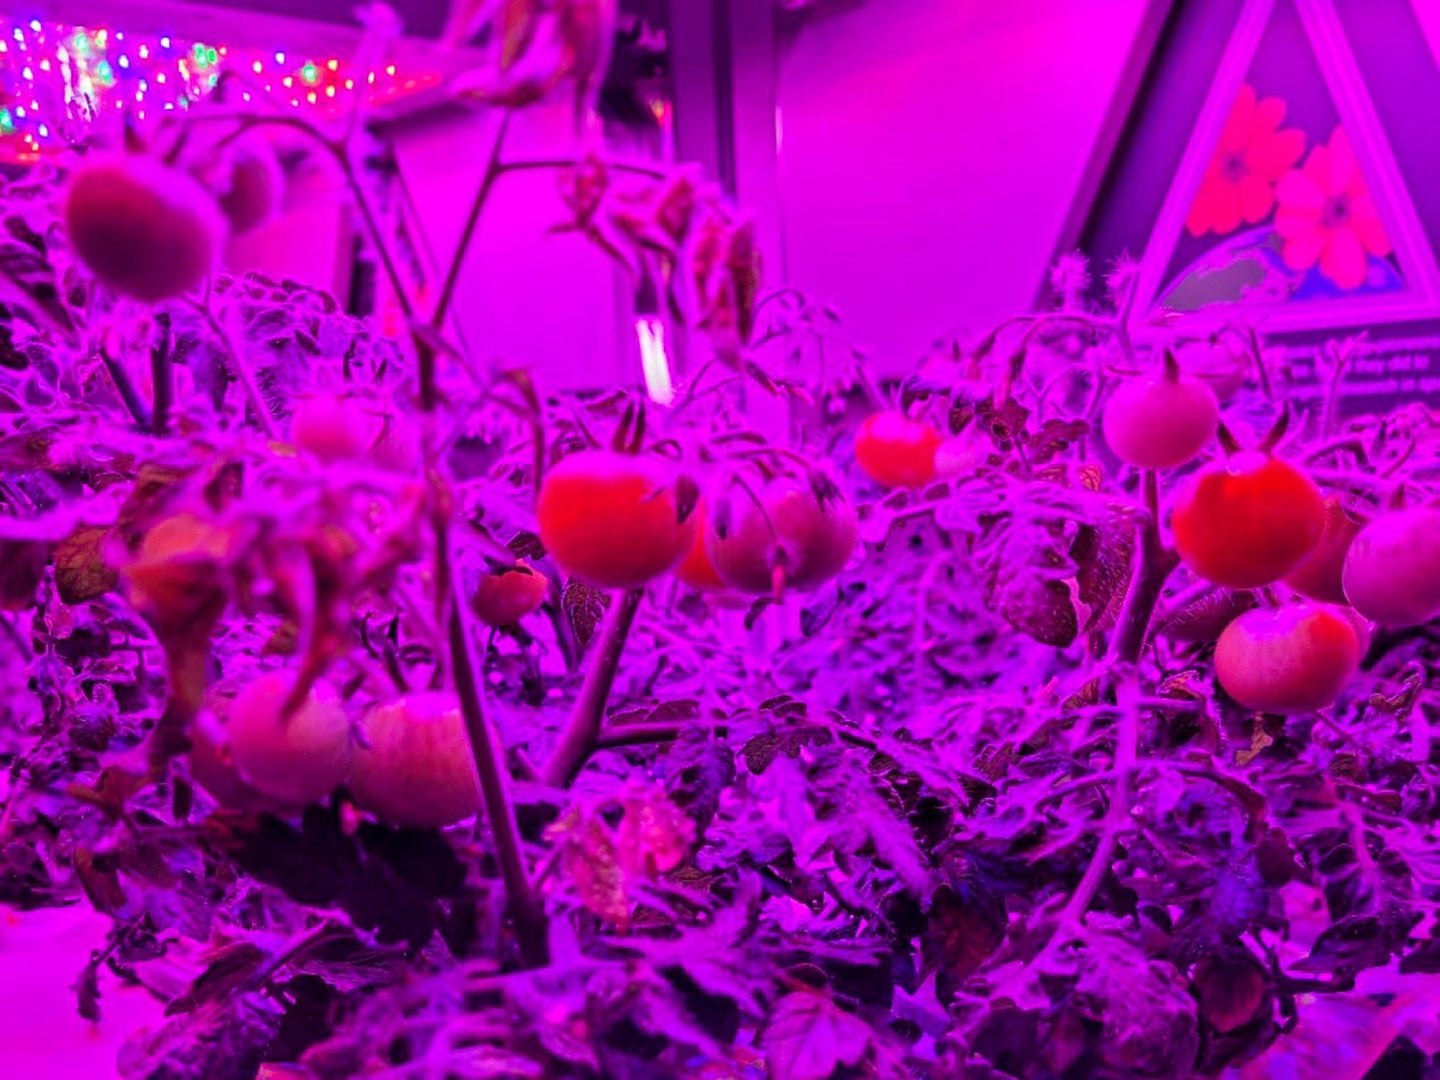 ‘Red Robin’ dwarf tomato growing in Veggie hardware at the Kennedy Space Center. Image courtesy of NASA